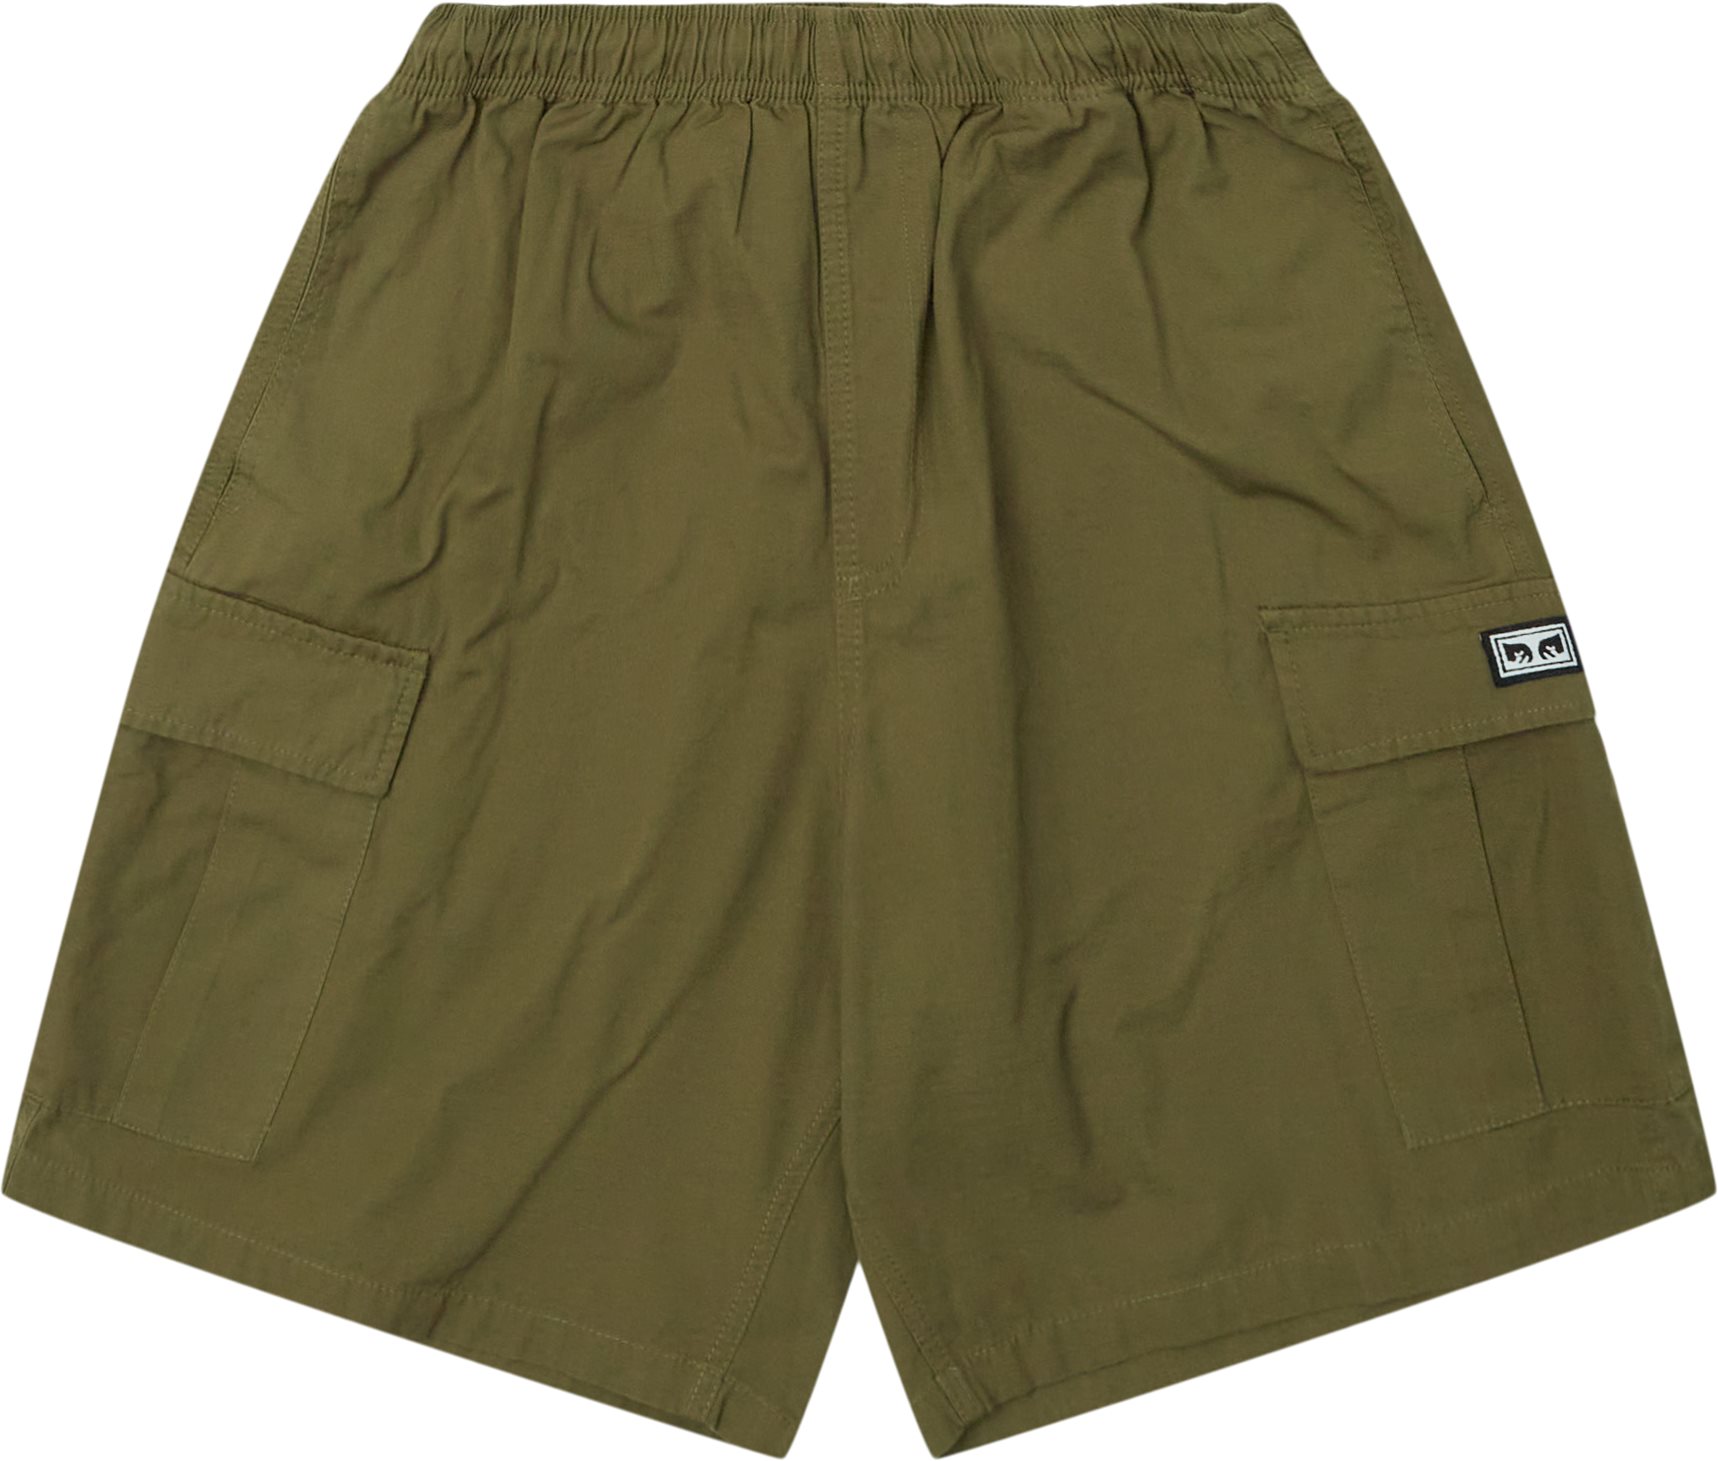 Obey Shorts RIPSTOP CARGO 172120077 Sand